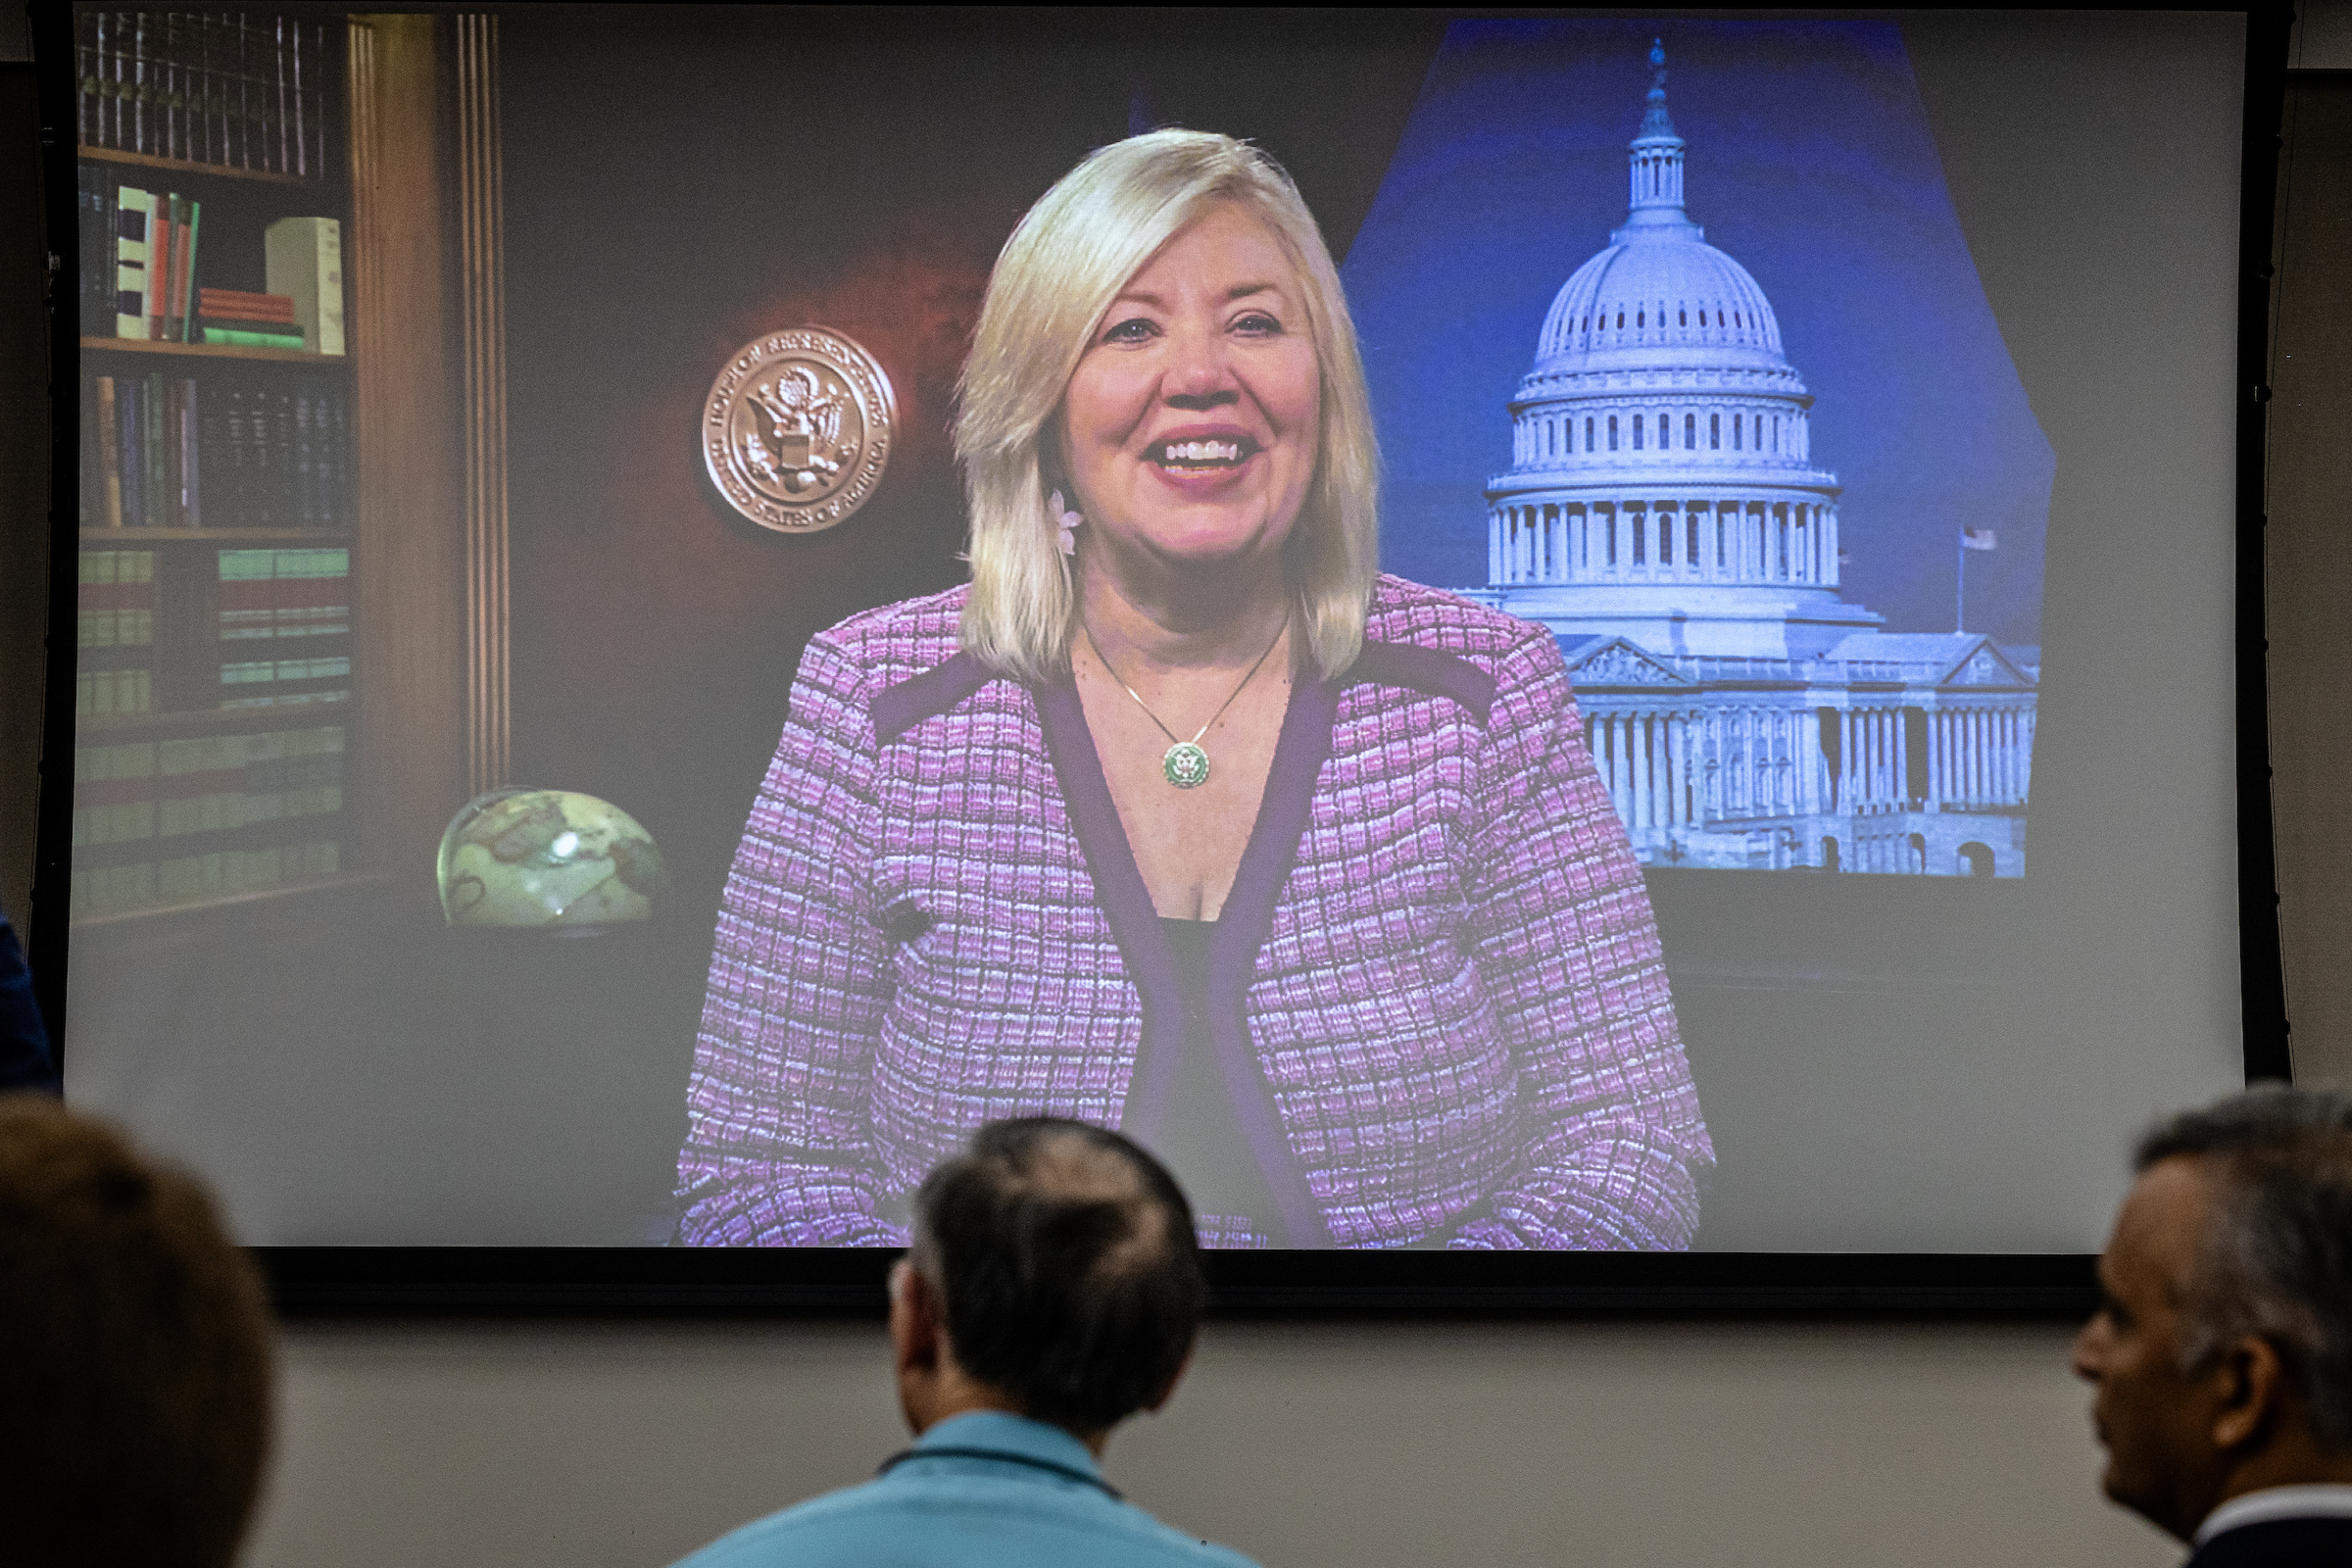 View of woman speaking on large screen